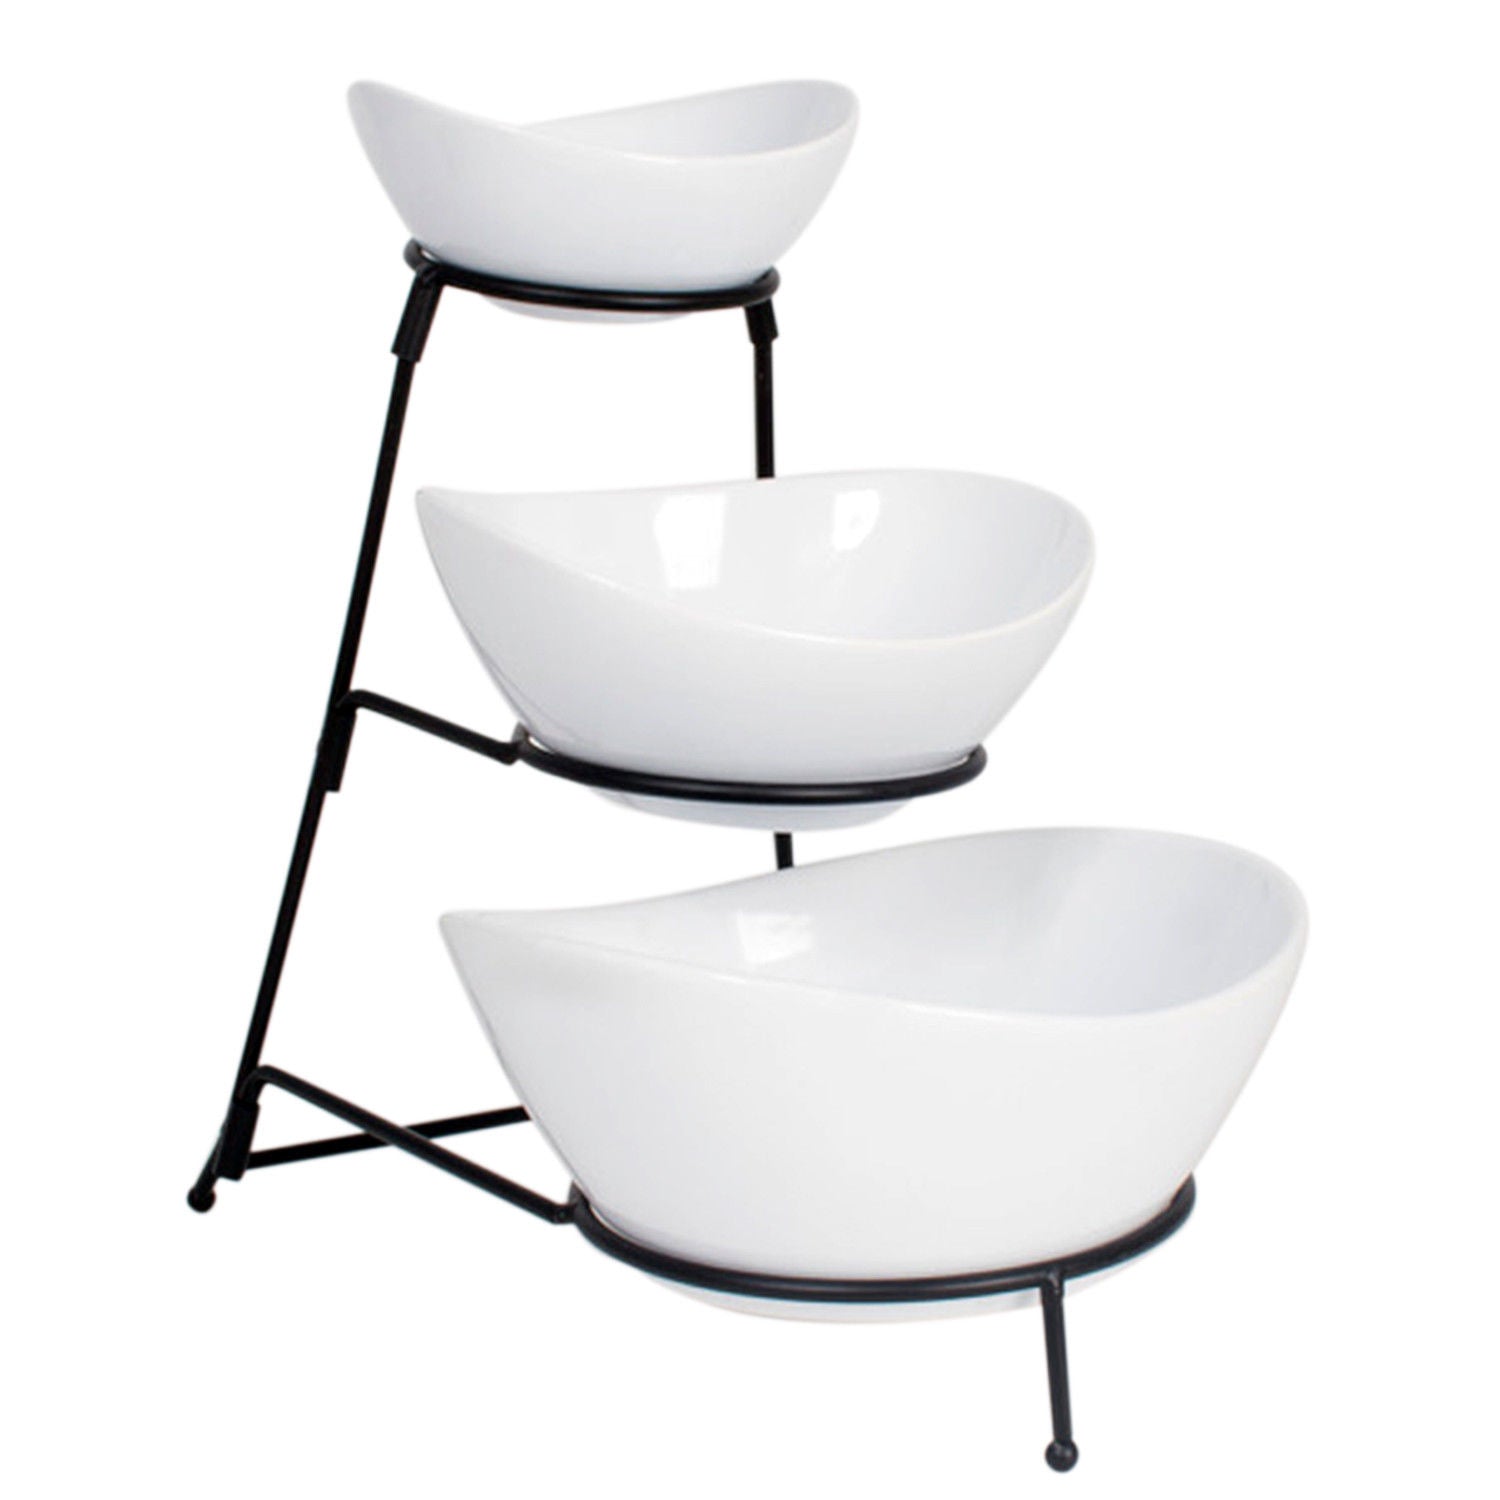 Ceramic 3 Tier Serving Bowls - Oval Serving Bowl With Stand